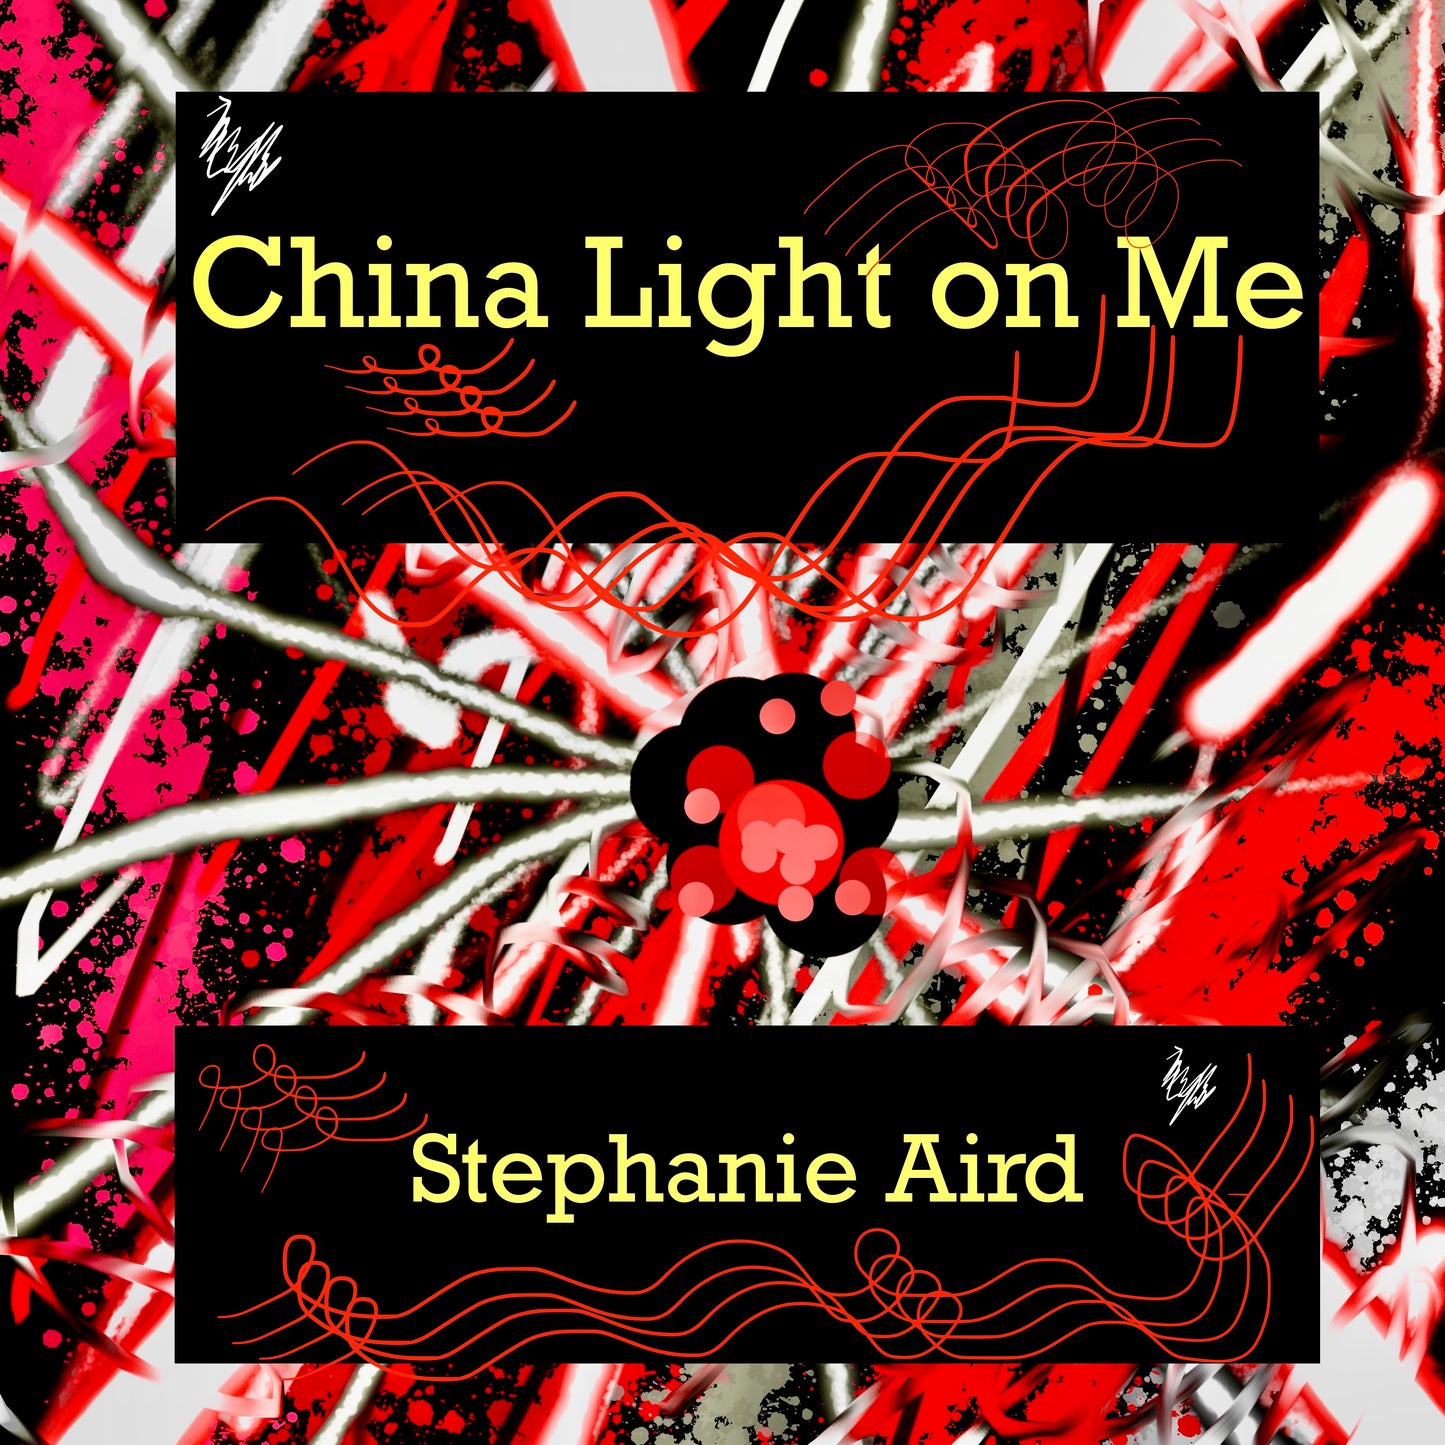 China Light on Me 🐼 Download the MP3 NOW 💫